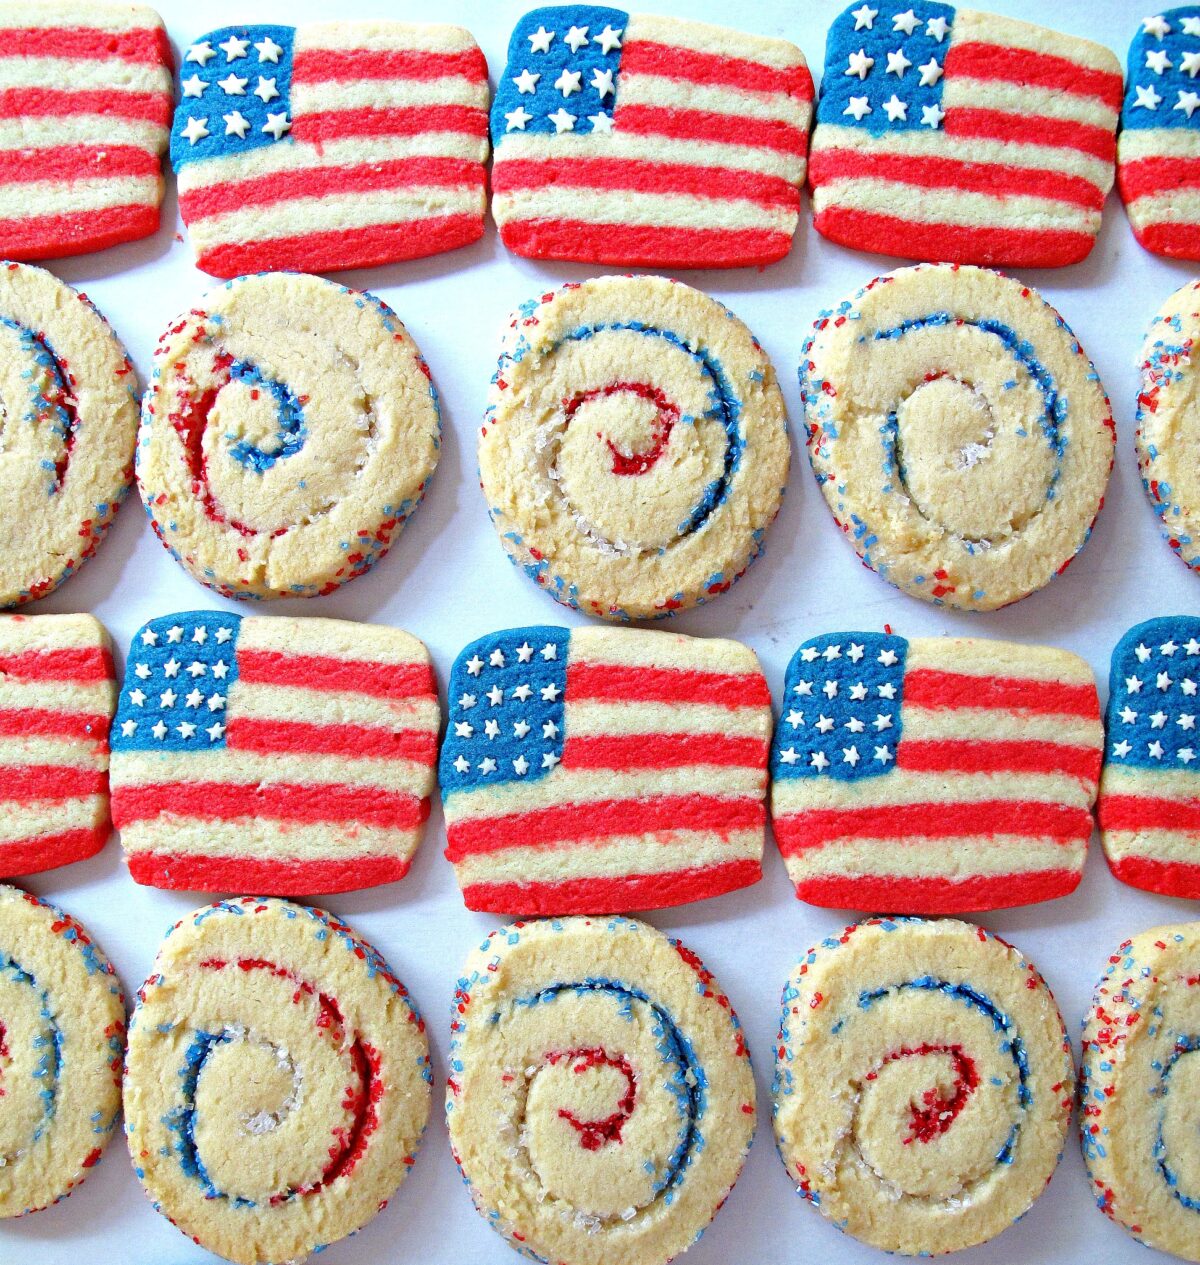 Flag cookies and spiral sparkler cookies in red, white, and blue.